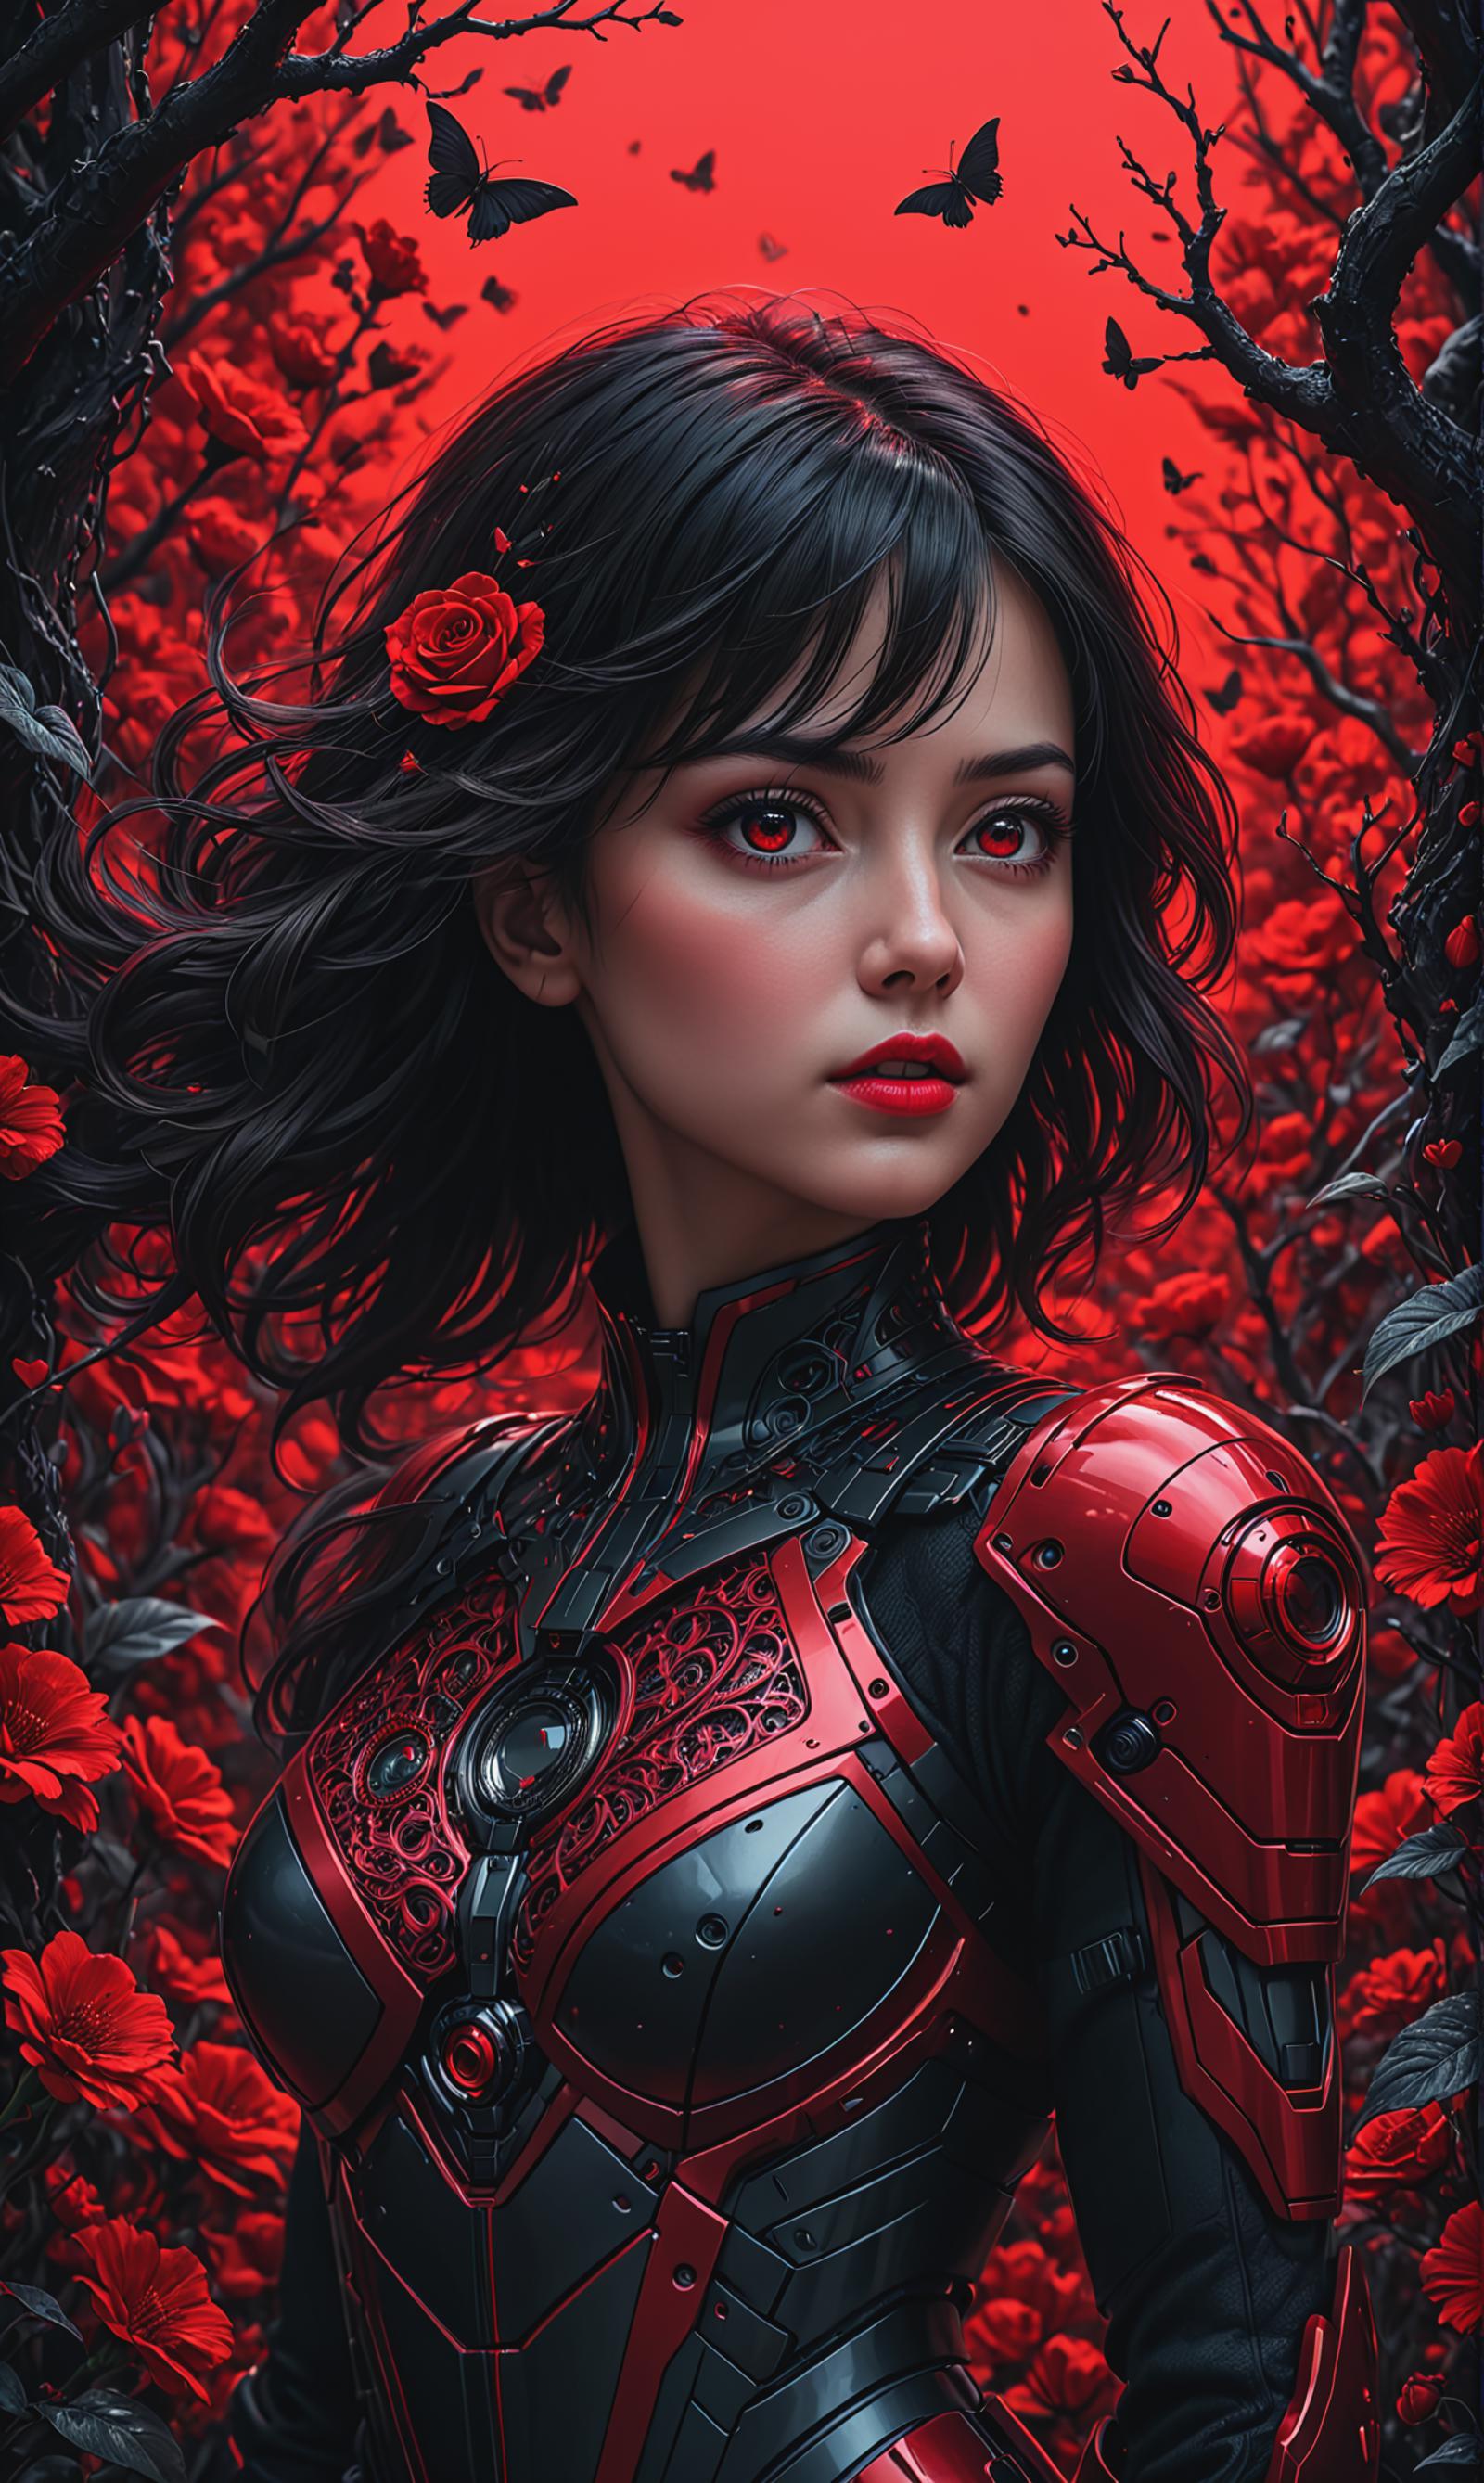 A woman with red eyes and red armor on a red background.